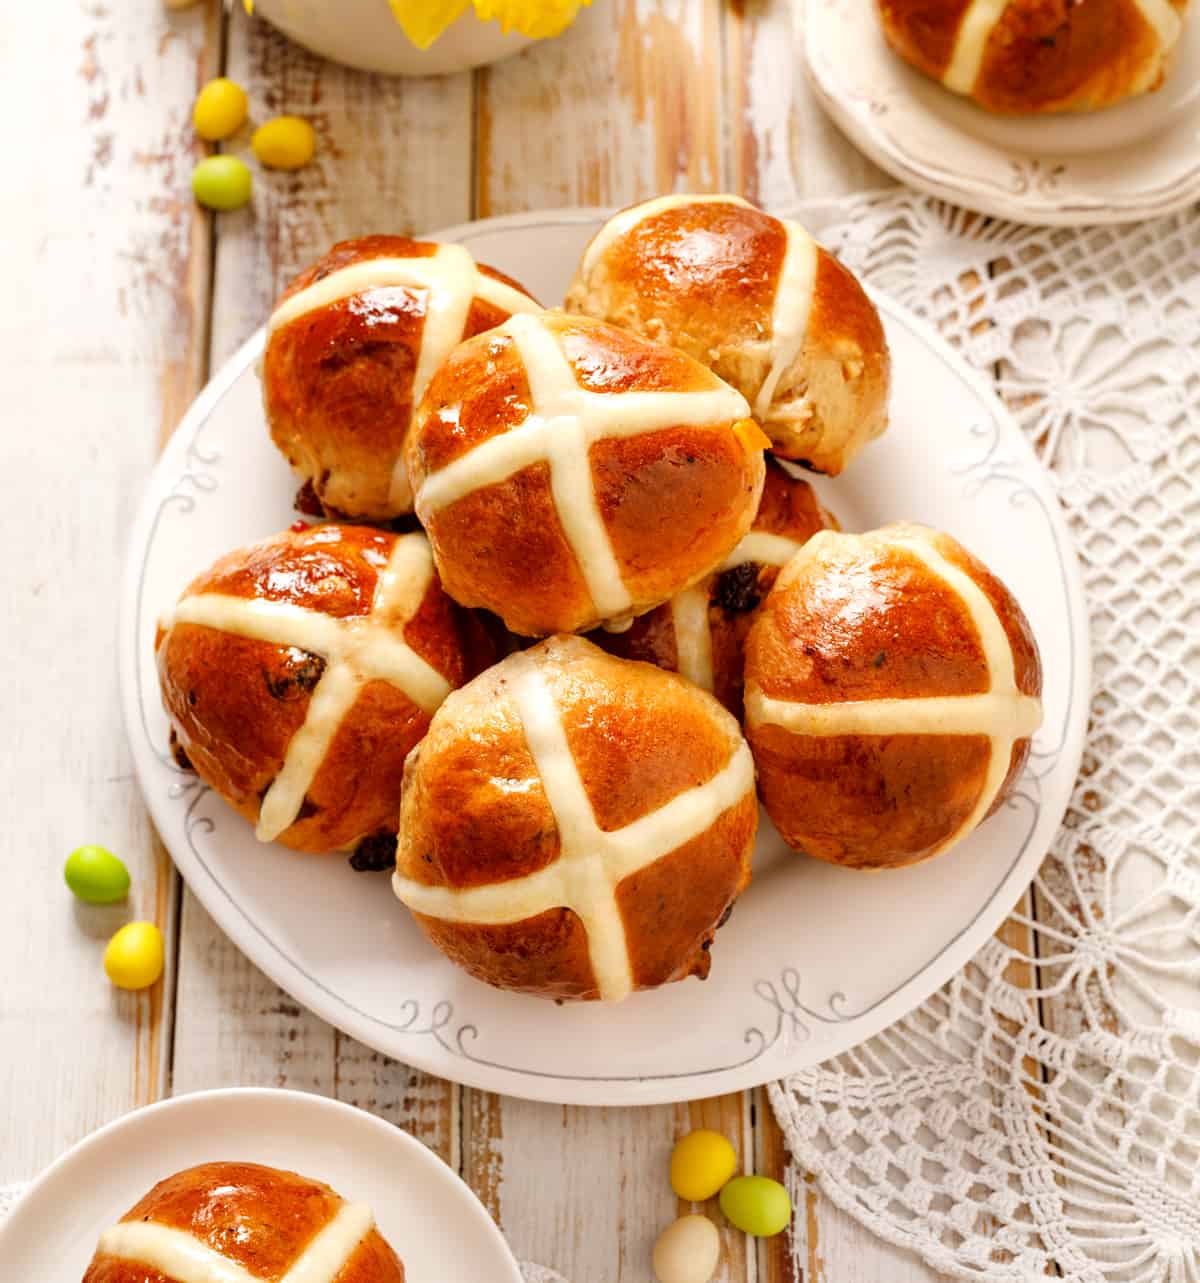 hot cross buns recipe traditional english british authentic easter st alban buns yeast currants raisins mixed spice